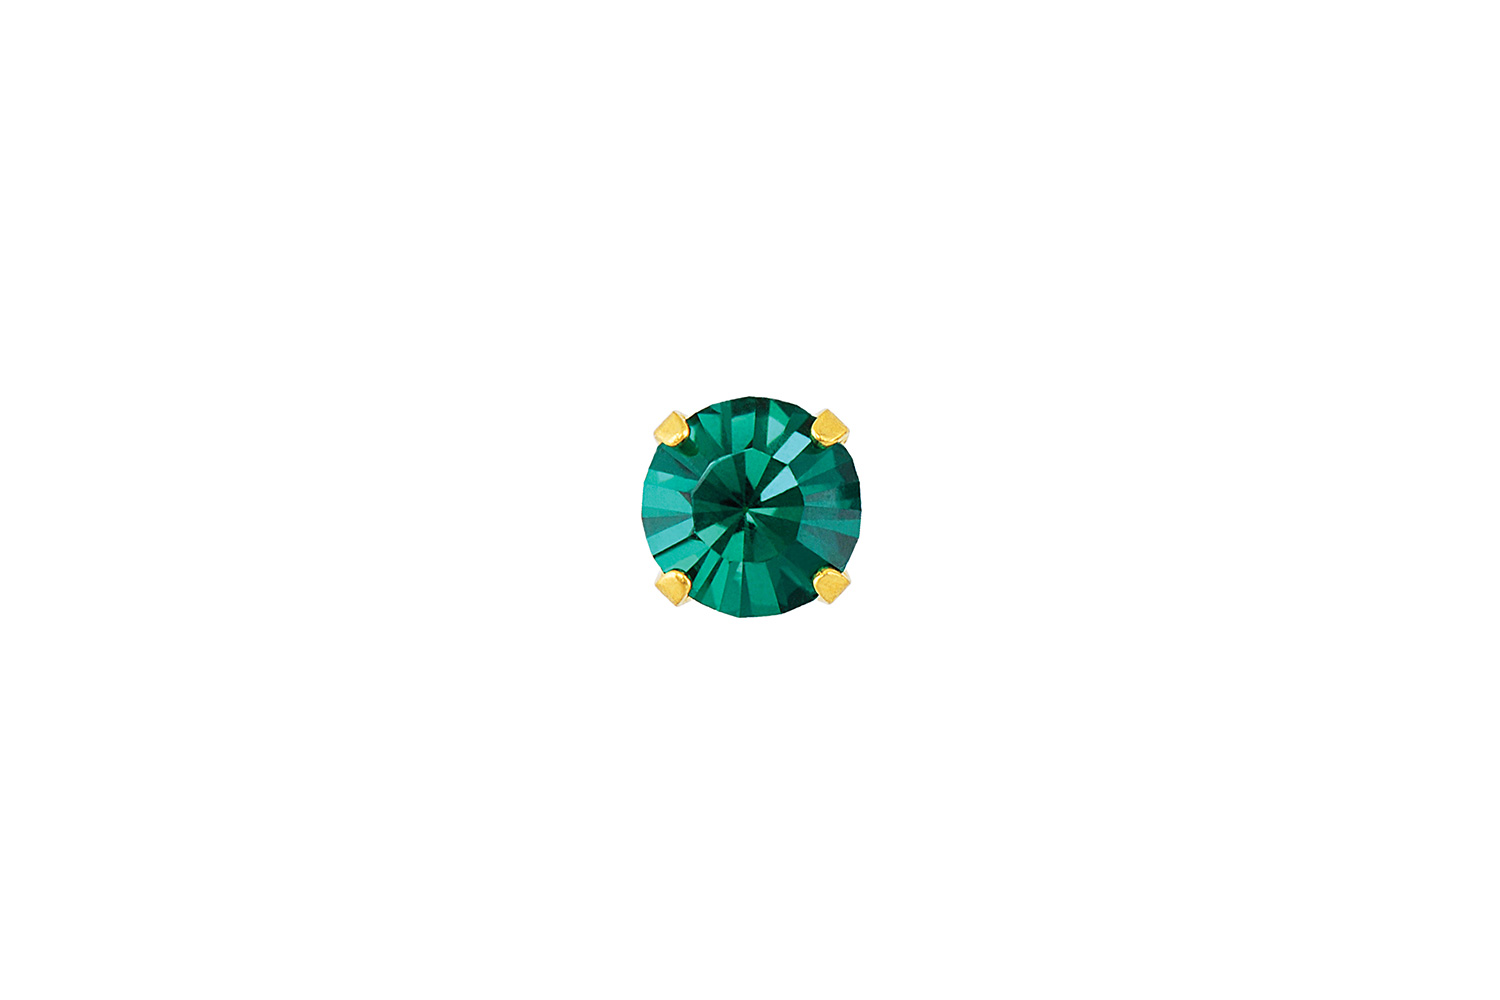 S785STX – Studex Sensitive Gold Plated Tiff. 5mm May Emerald Earrings